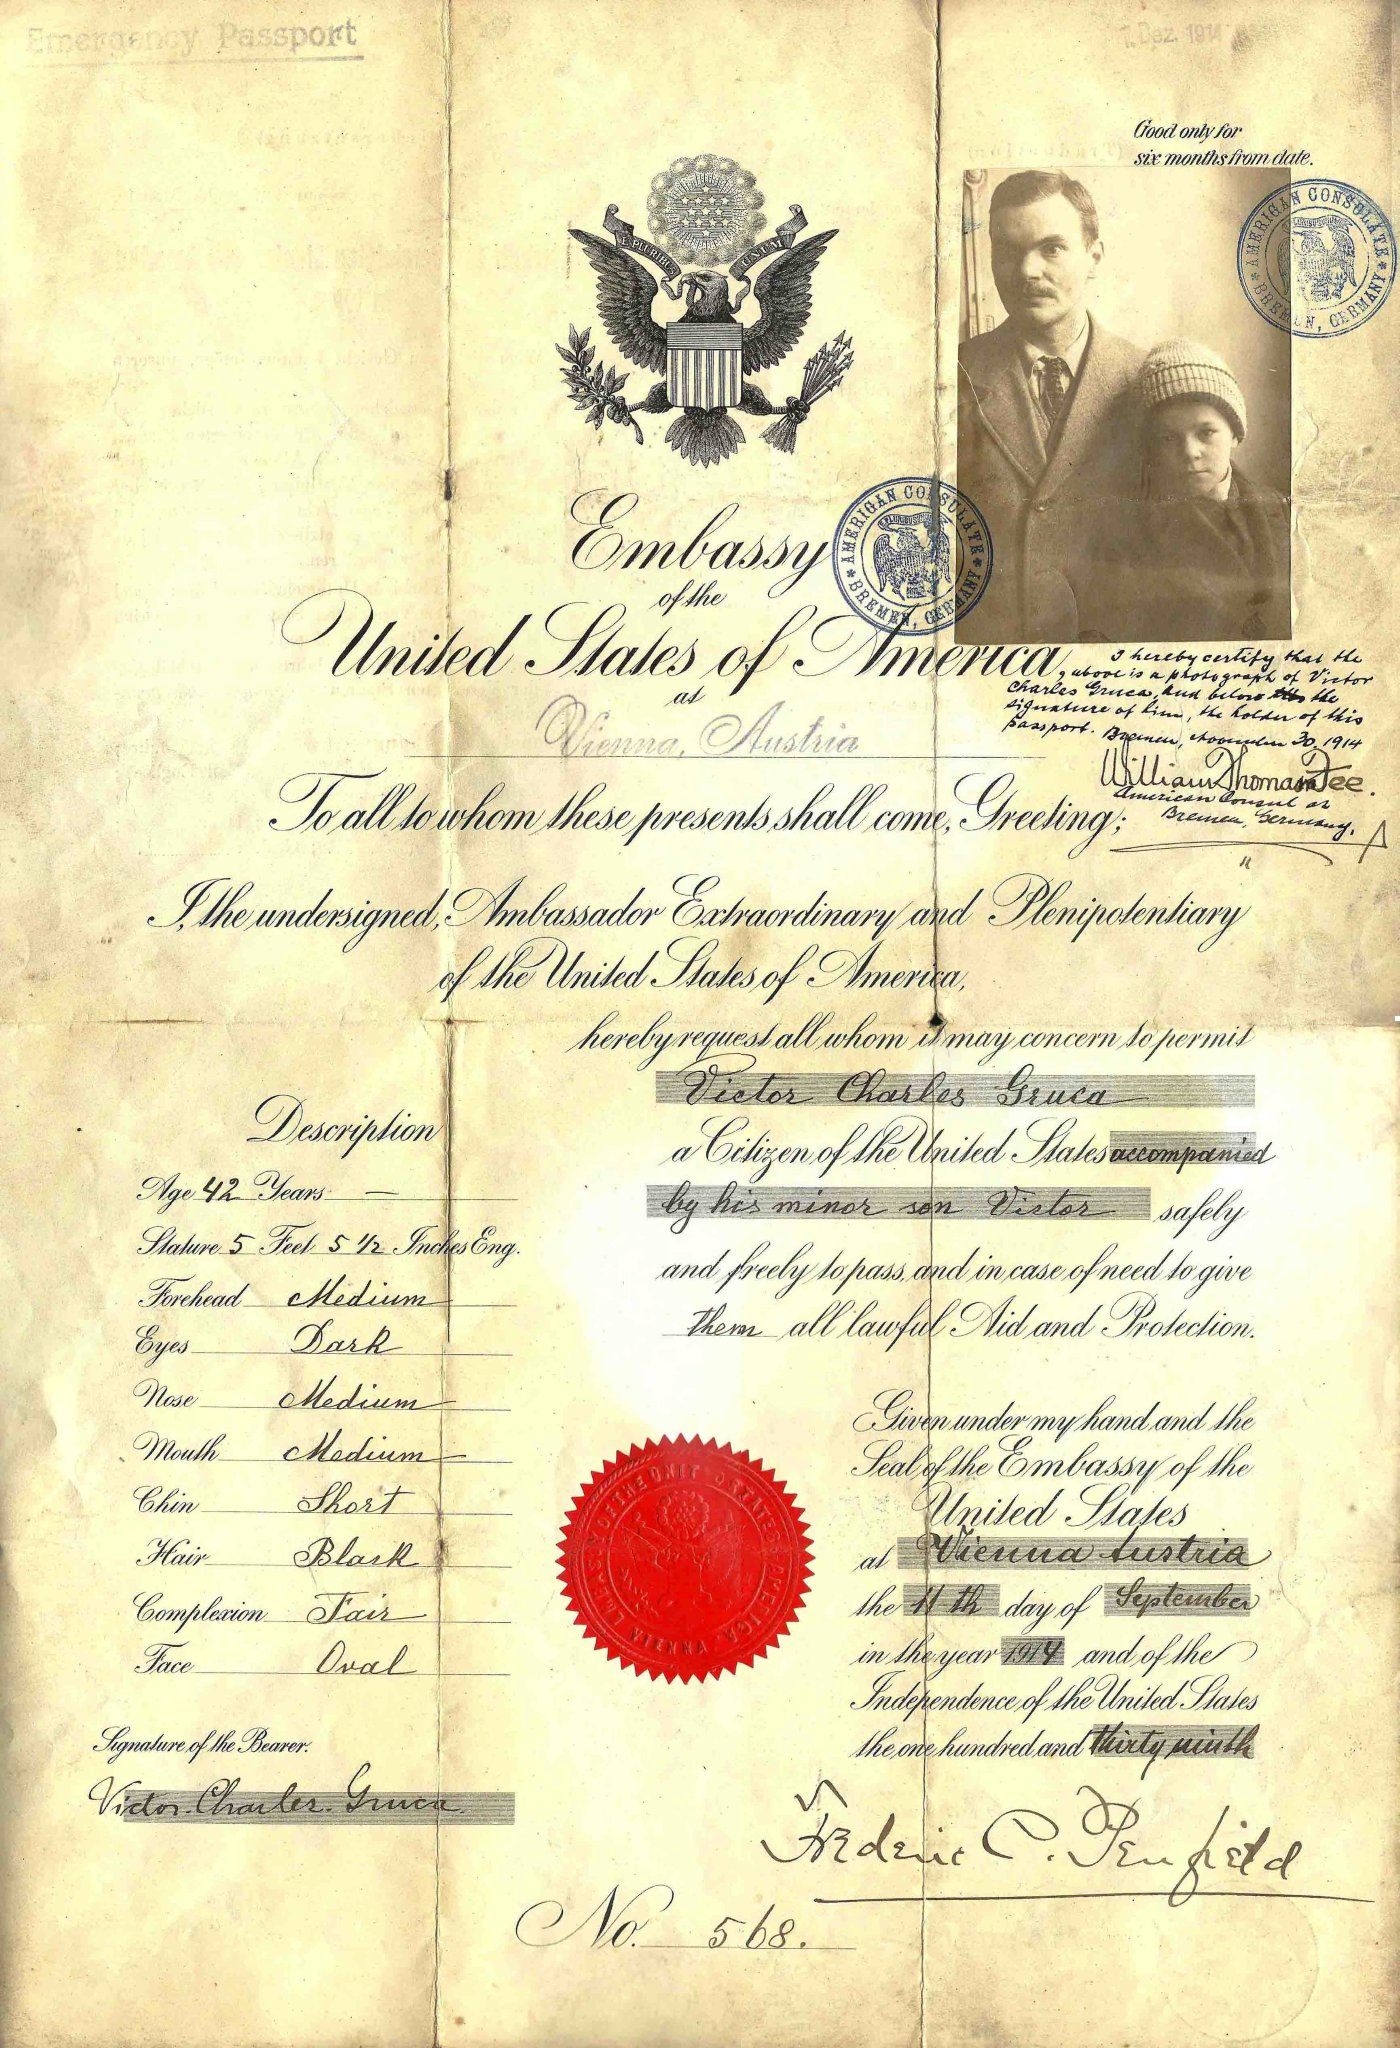 One of the earliest passport photos, from 1914, appears to have been added later as requirements were updated.